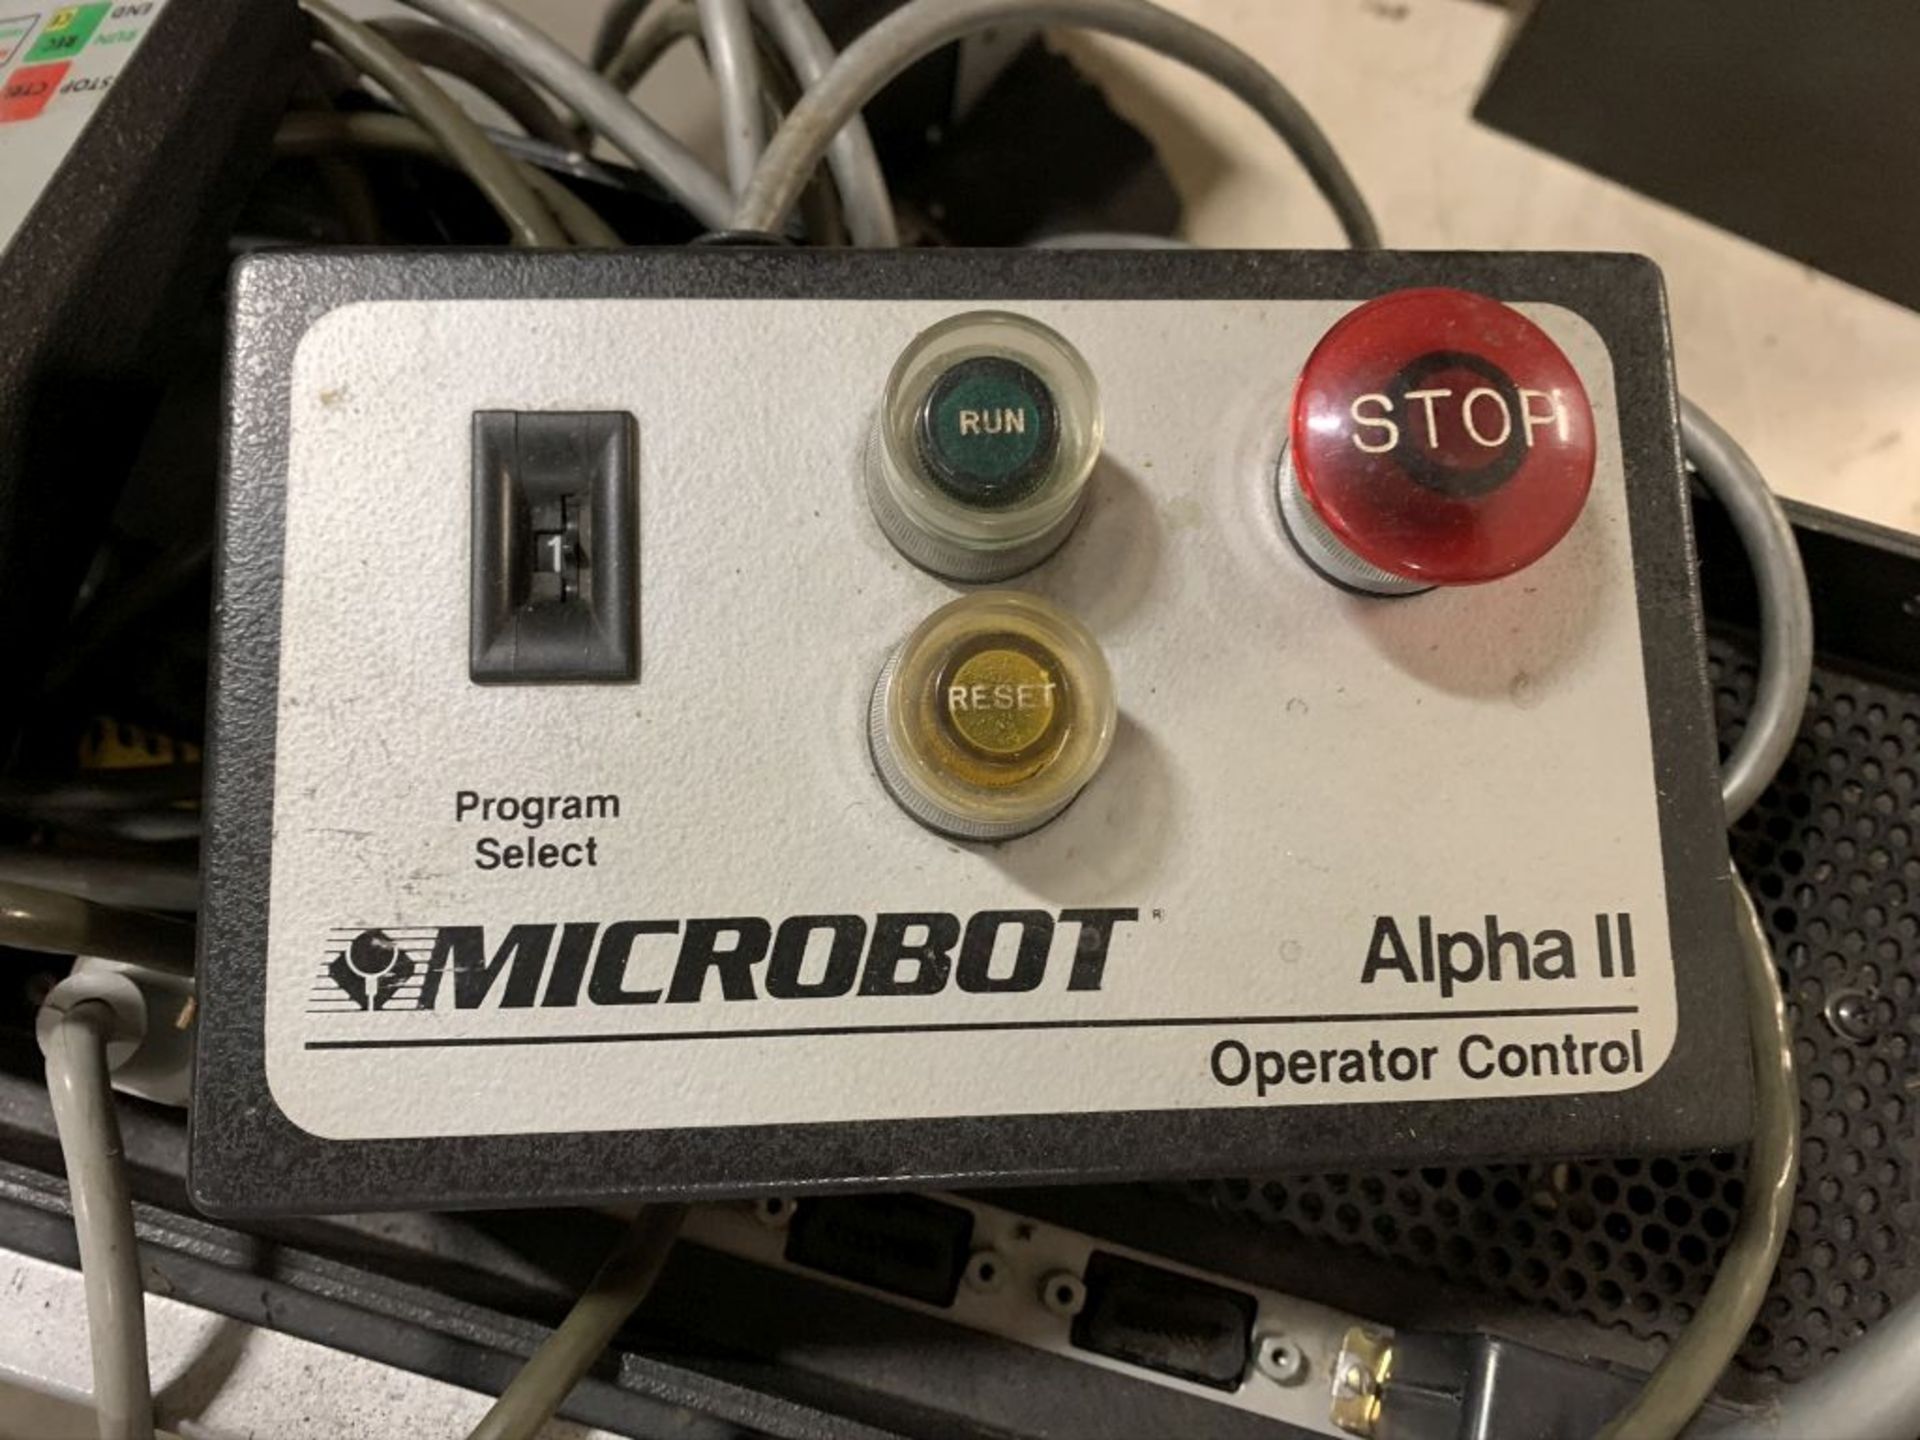 Microbot Alpha II with TEACH controller and Operator Control, serial number -1465 - Image 3 of 3